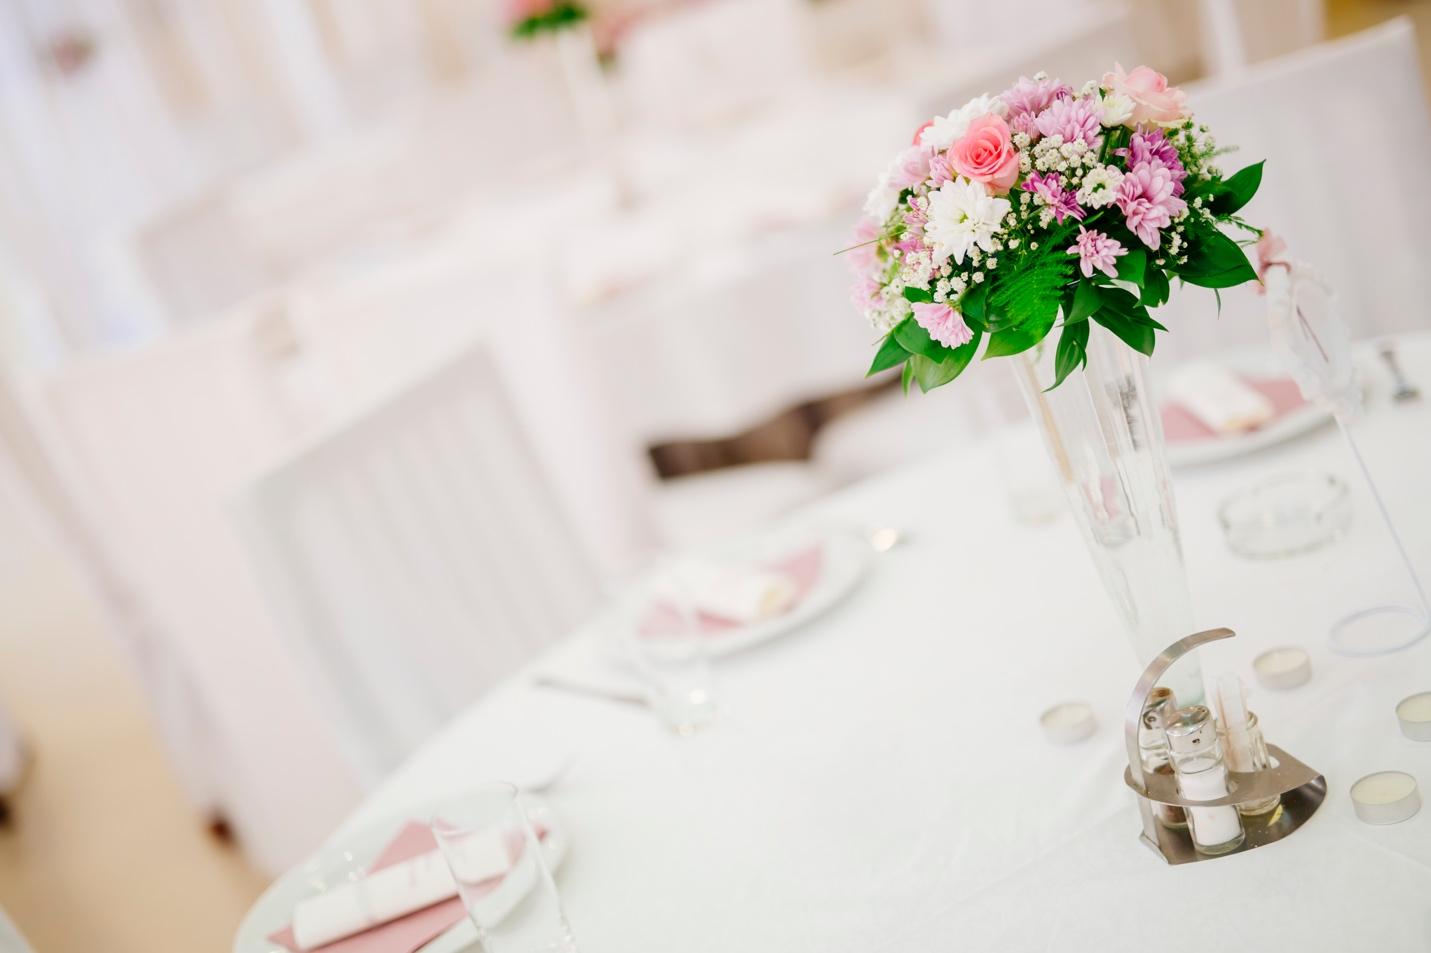 Why Corporate Event Flowers are Essential